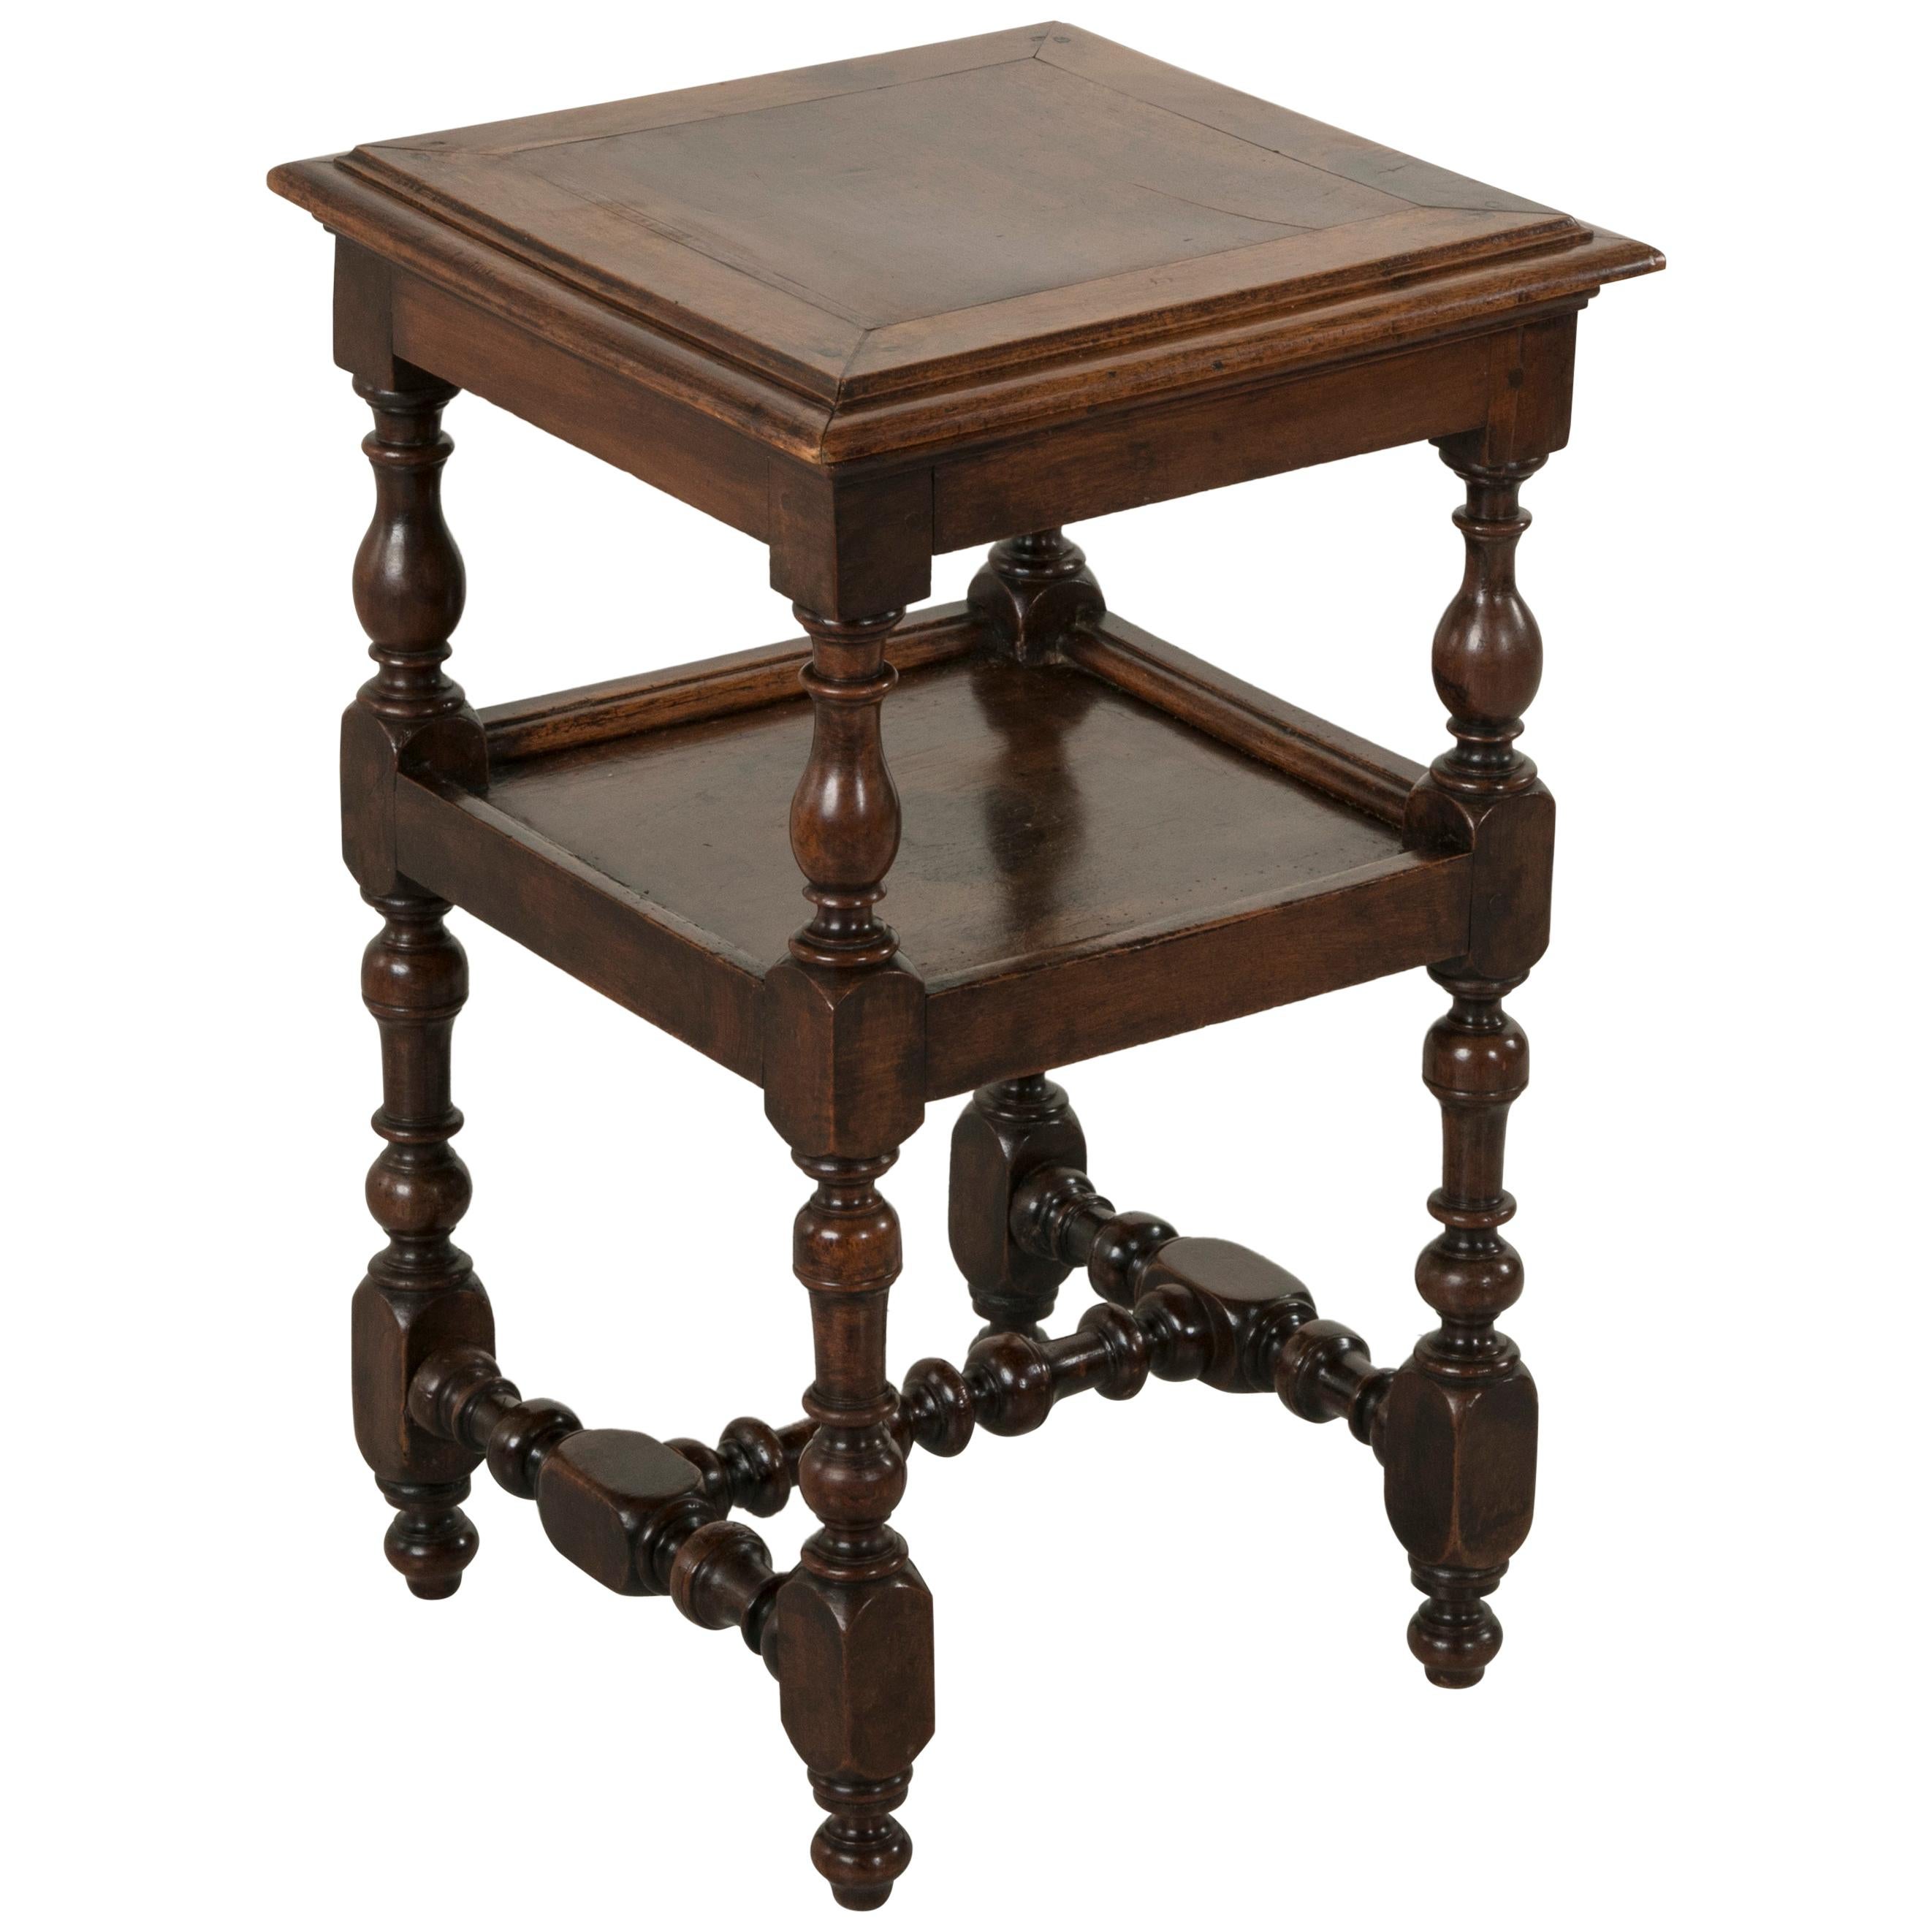 Early 19th Century French Louis XIII Style Walnut Side Table with Turned Legs